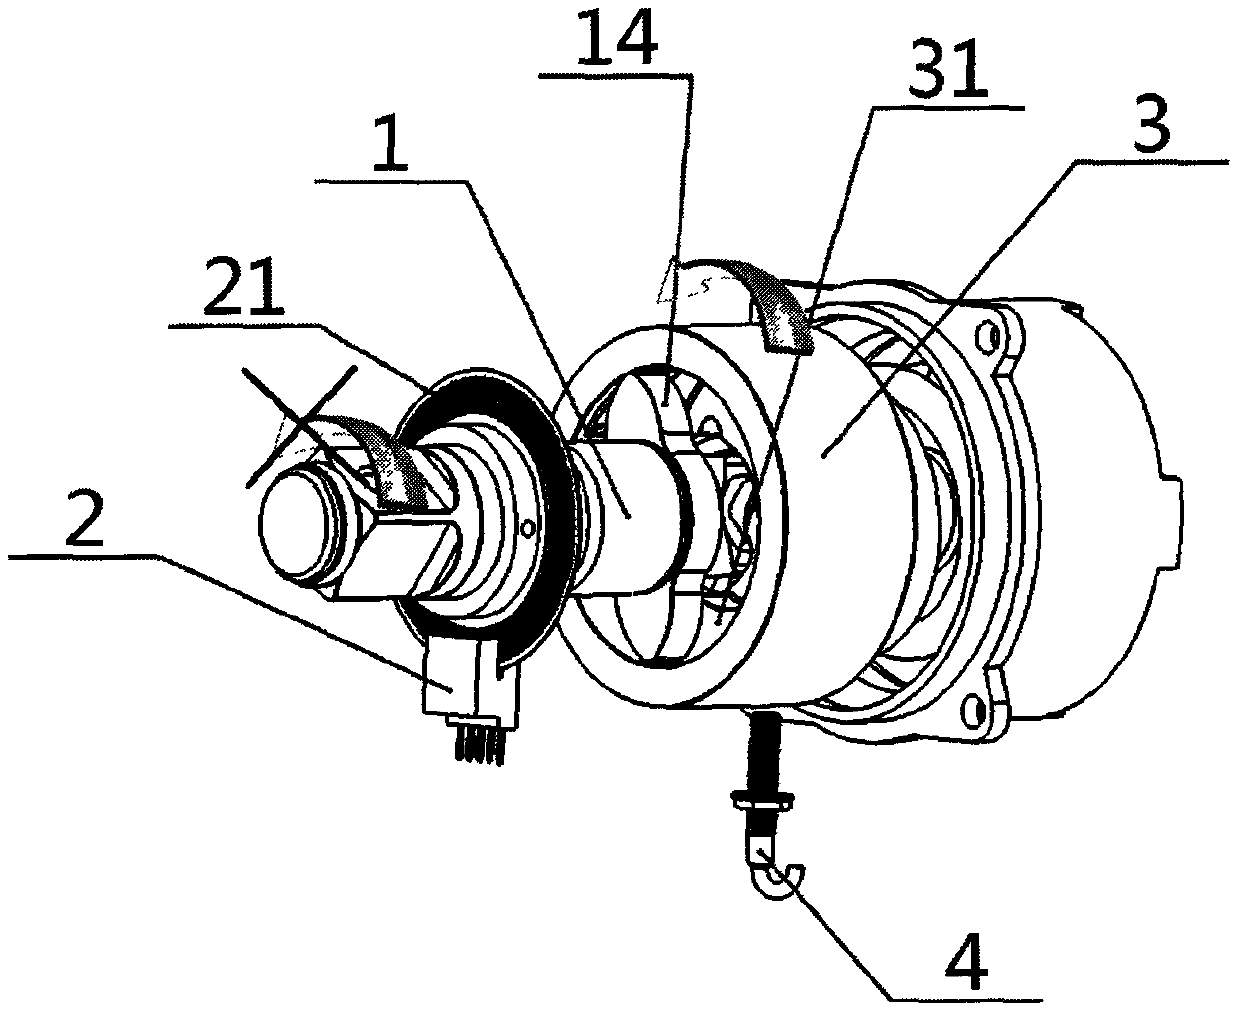 Impact wrench screwing angle and torque detection, reading and controlling method